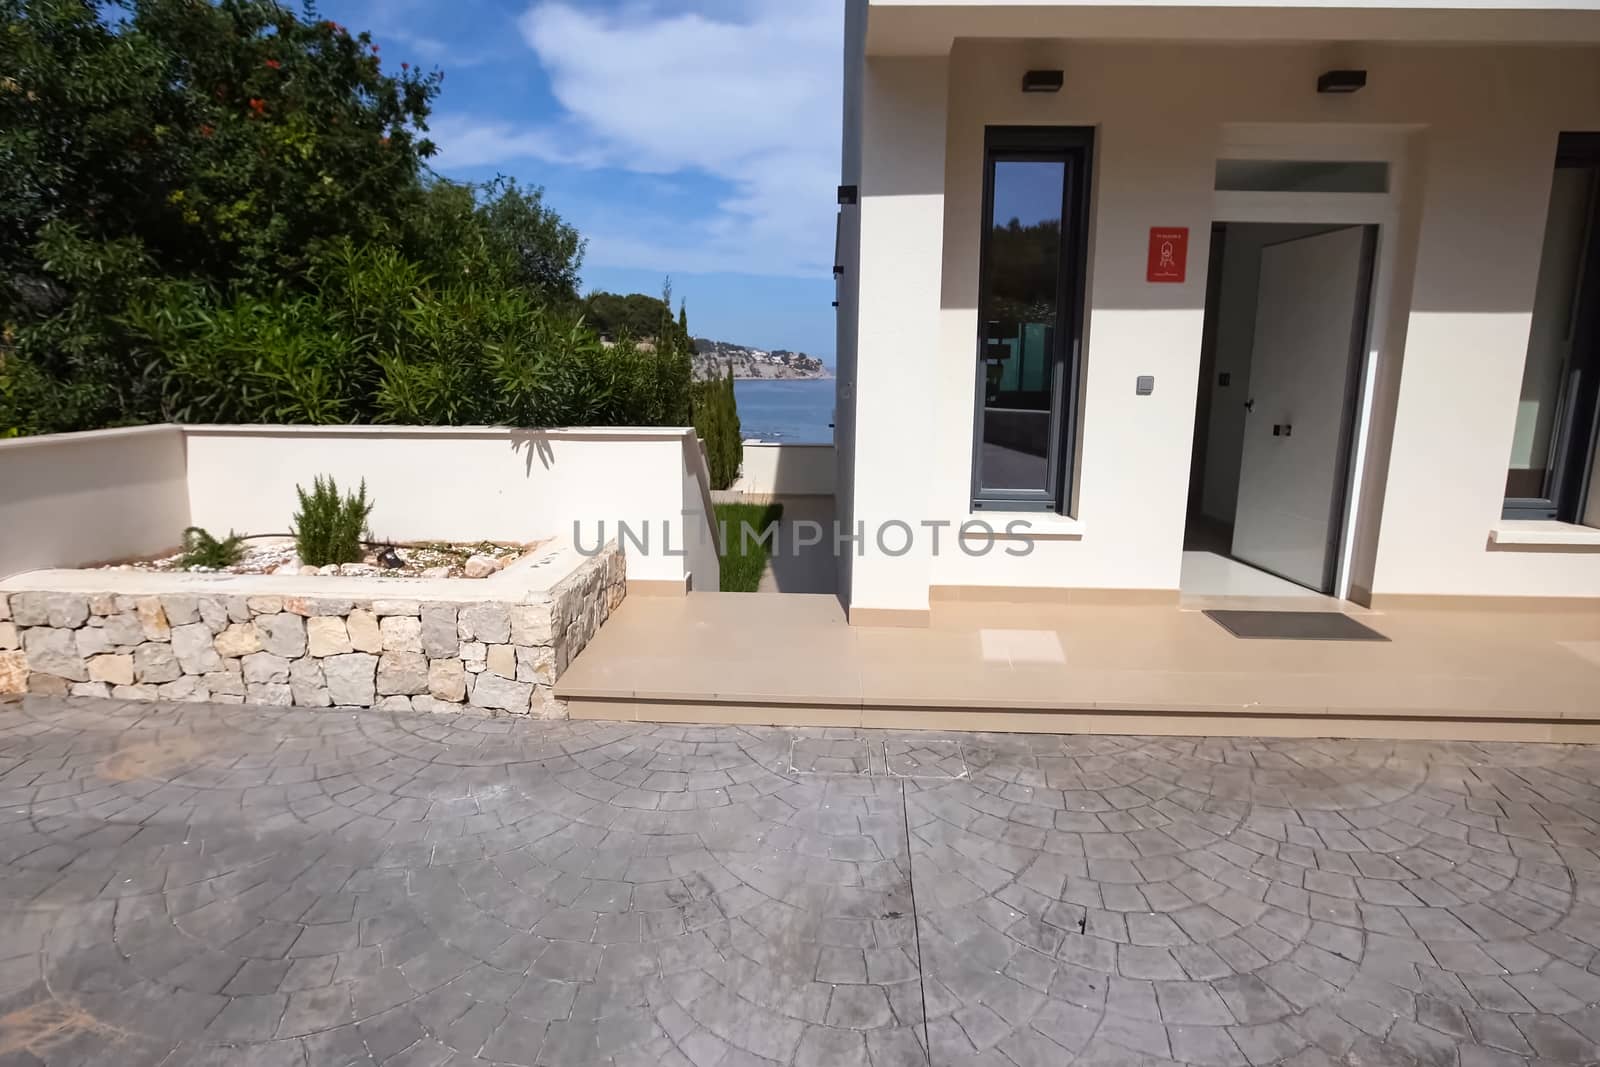 house in Spain by the sea. Two-storey cottage with their amenities. by DePo